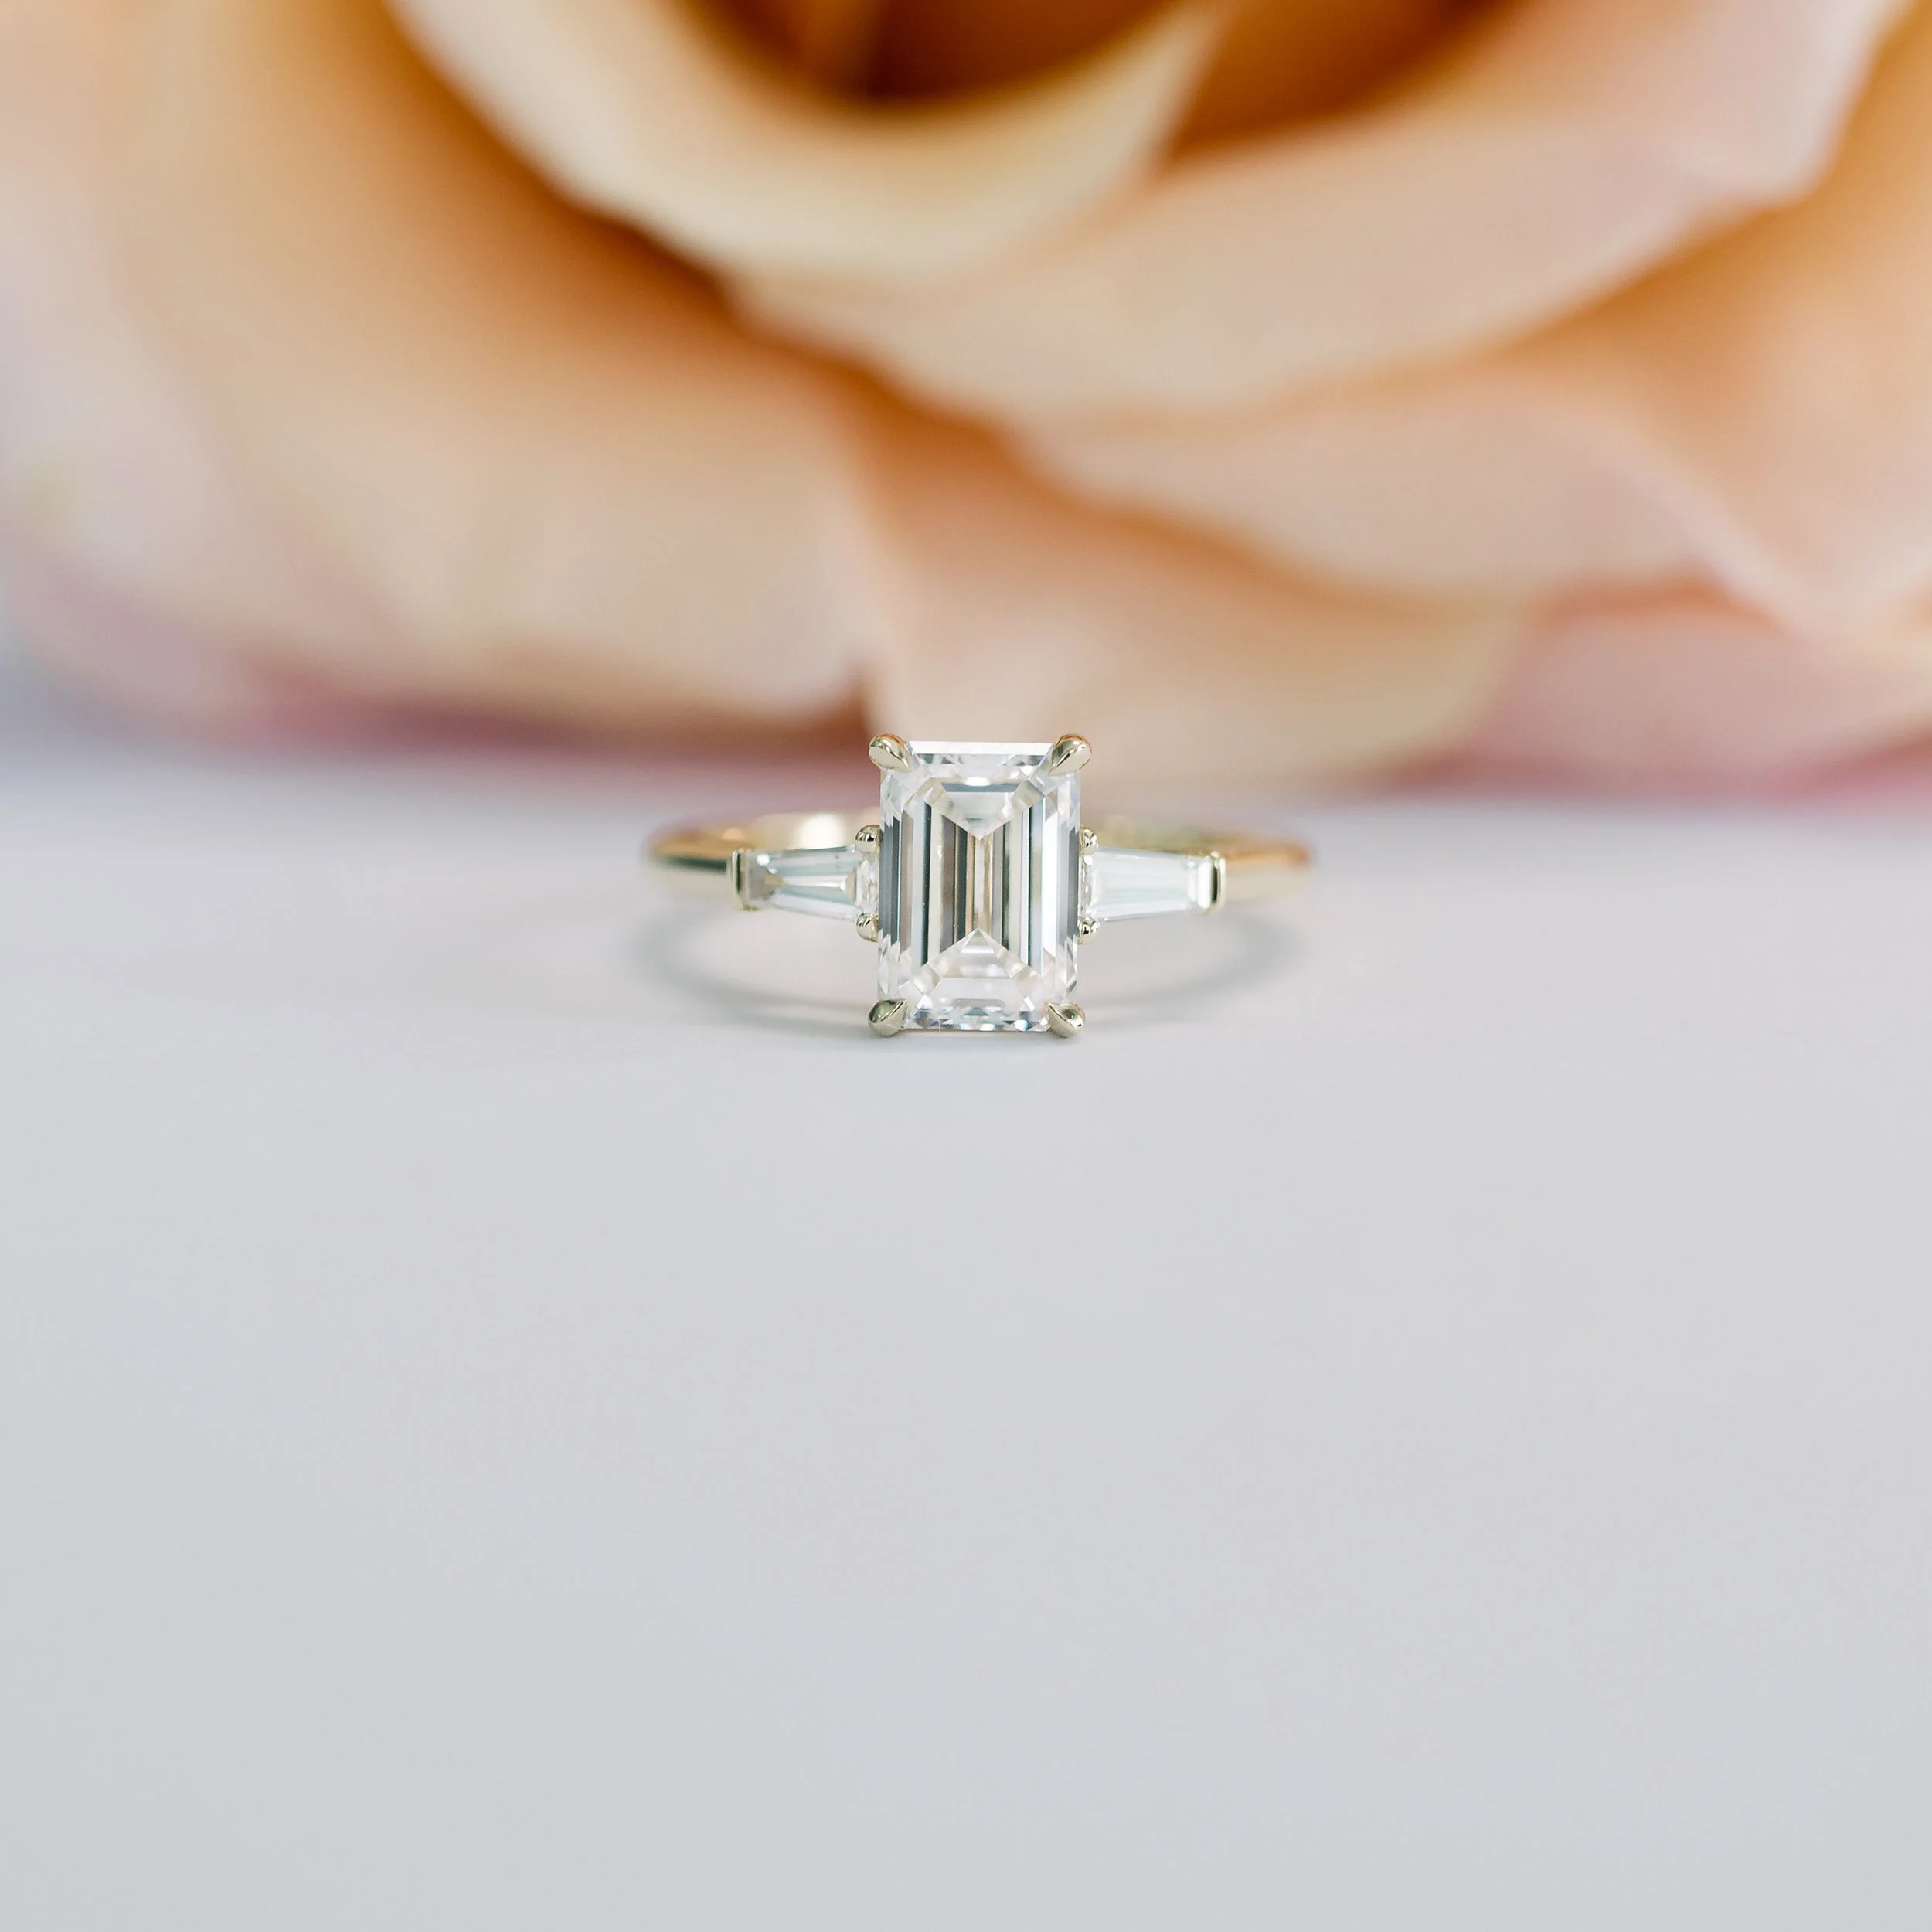 1.75ct emerald cut with tapered baguettes